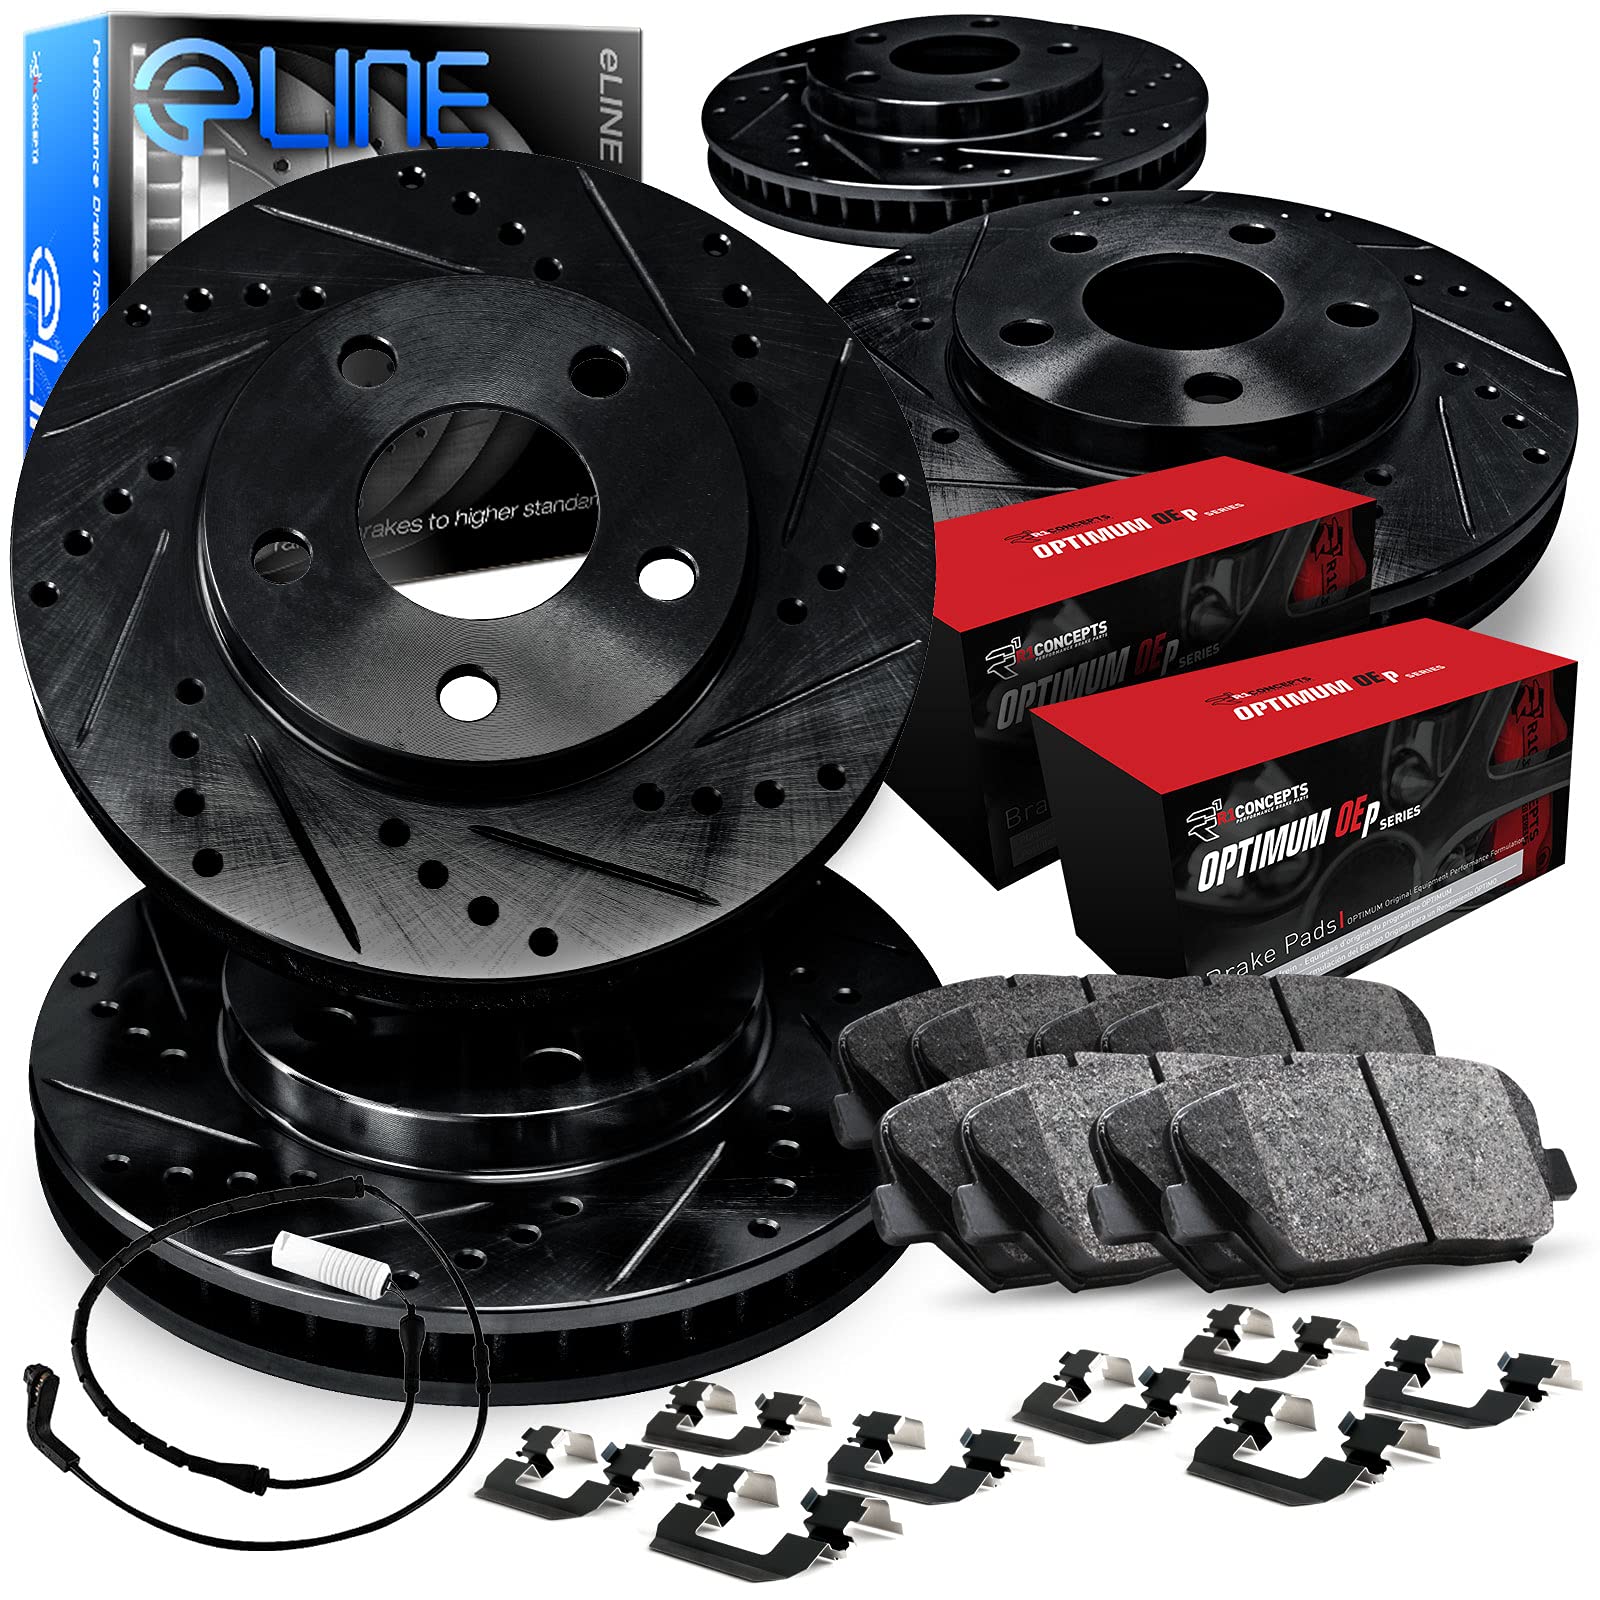 R1 Concepts Front Rear Brakes and Rotors Kit |Front Rear Brake Pads| Brake Rotors and Pads| Optimum OEp Brake Pads and Rotors |Hardware and Sensor Kit|fits 2011-2014 Porsche Cayenne